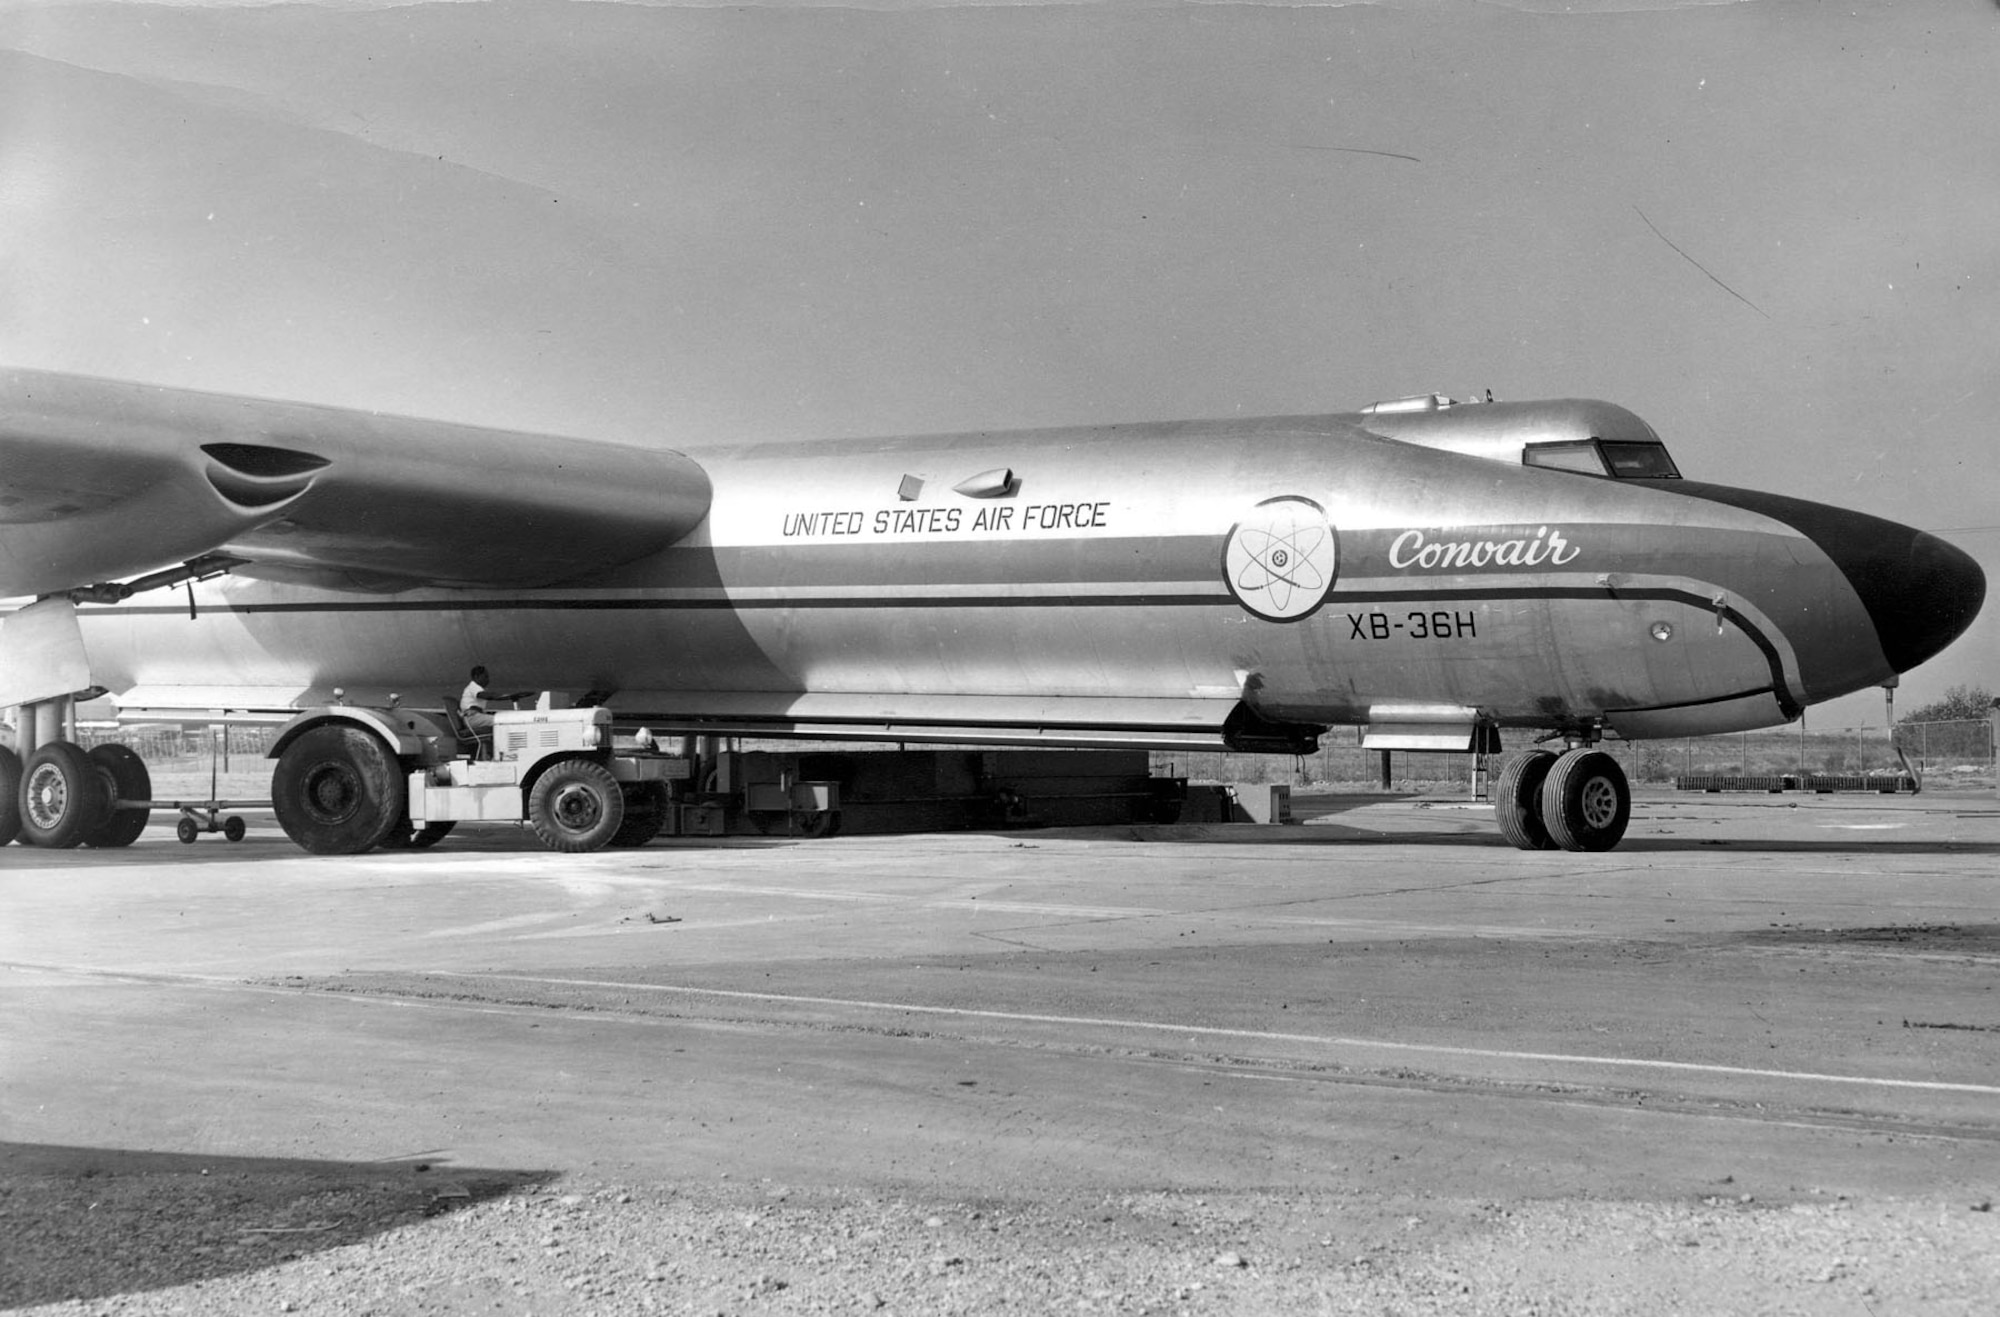 Detail of Convair NB-36H nose section. Note the aircraft has its original designation of XB-36H. (U.S. Air Force photo)